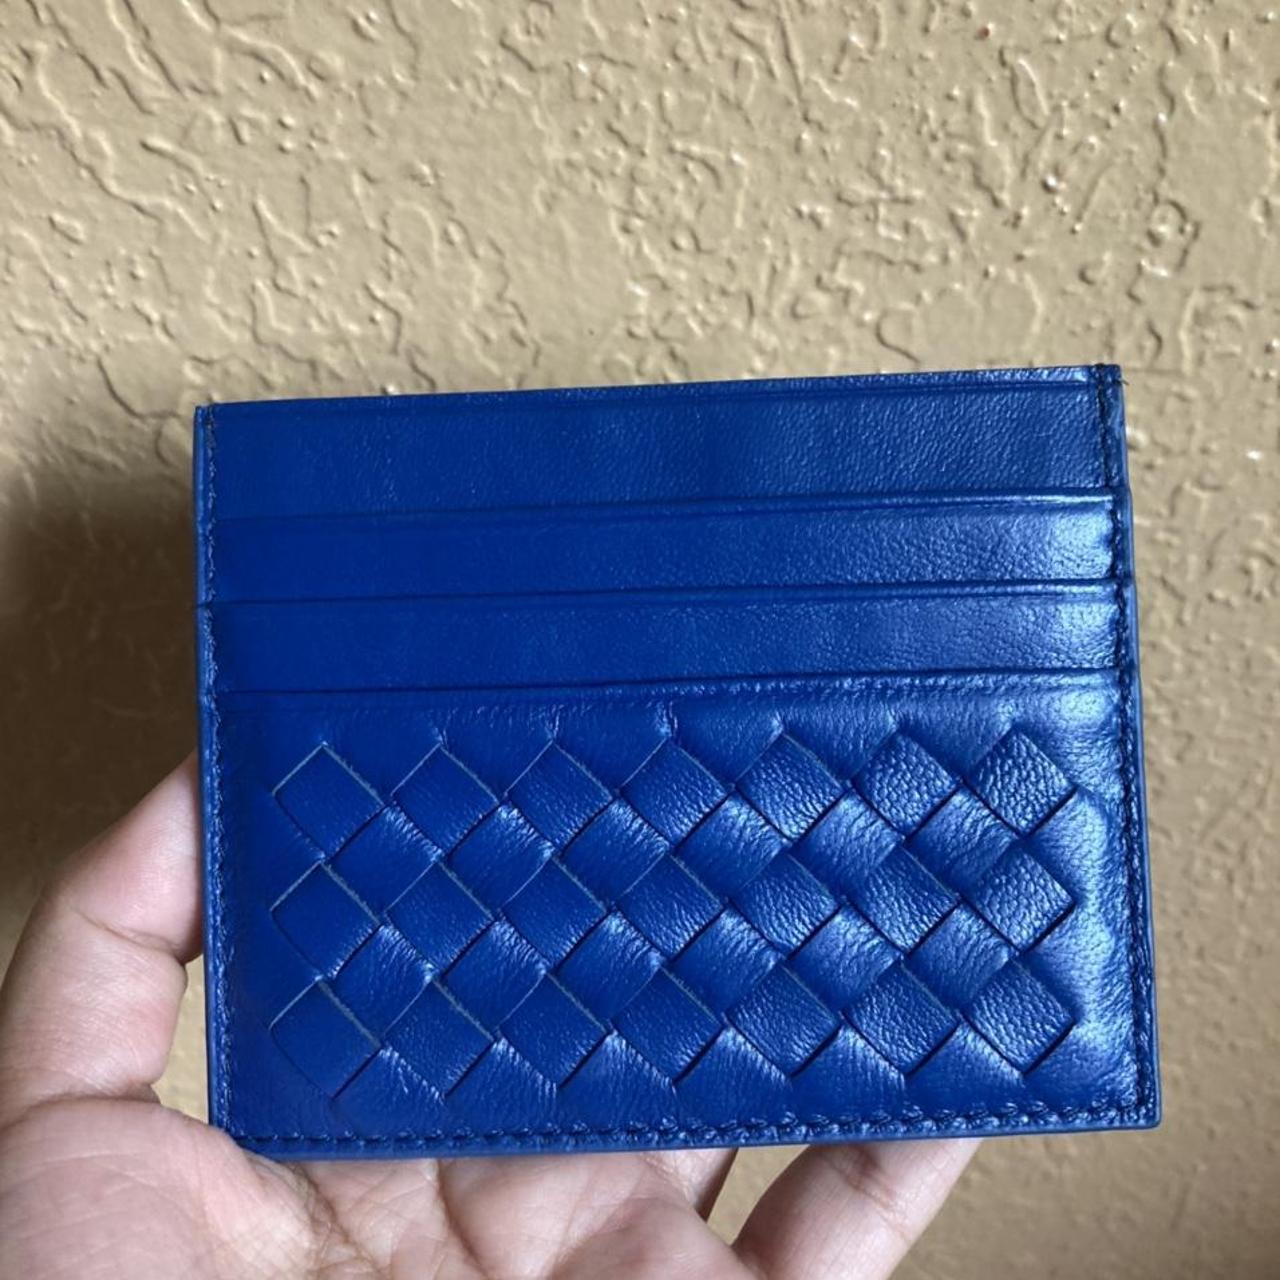 Product Image 1 - Leather blue card holder 
Only